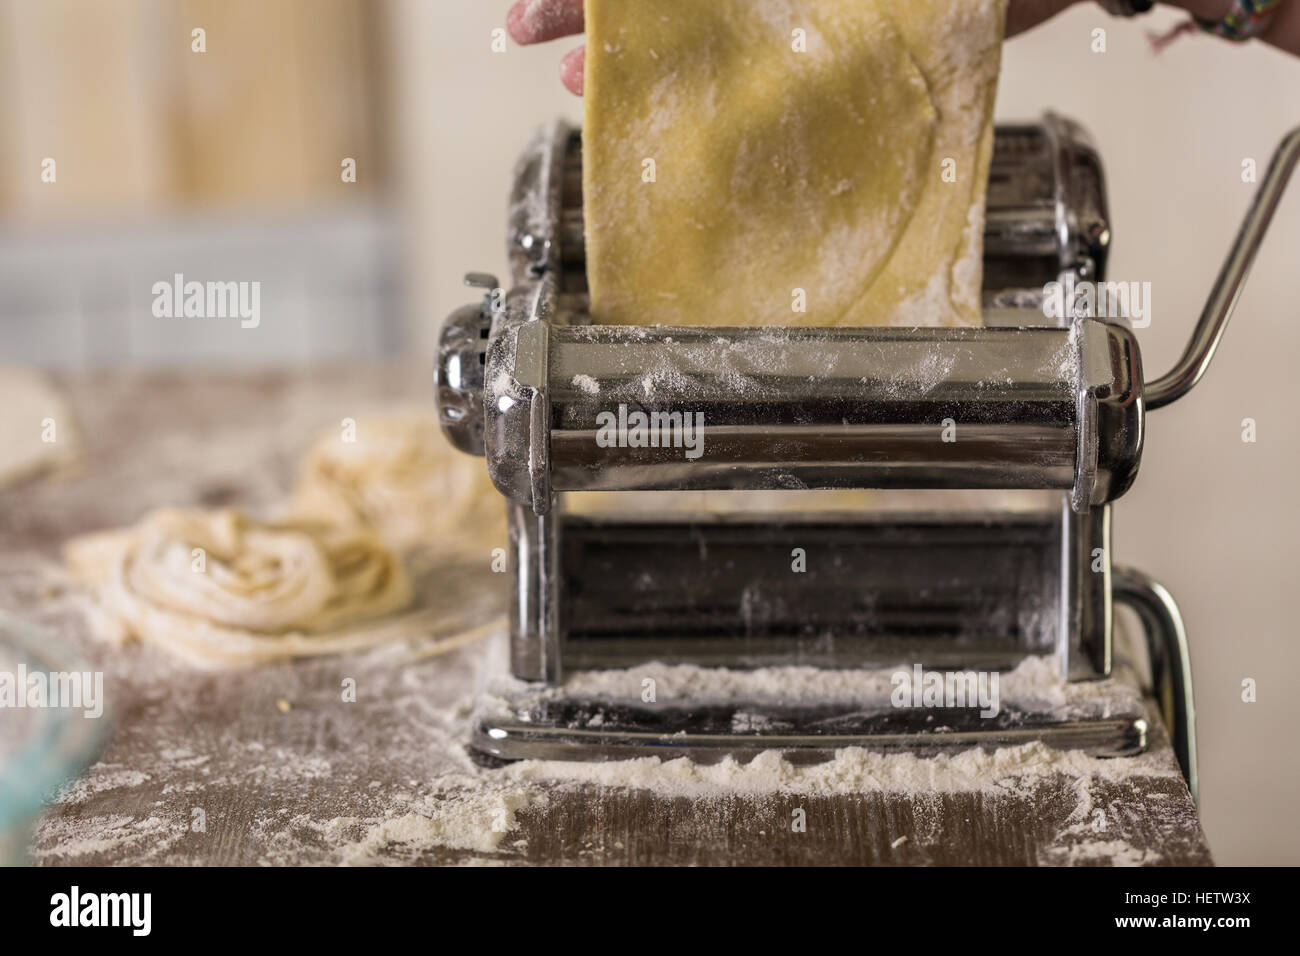 Automatic Pasta Machine Household Pasta Maker On A Kitchen Stock Photo -  Download Image Now - iStock